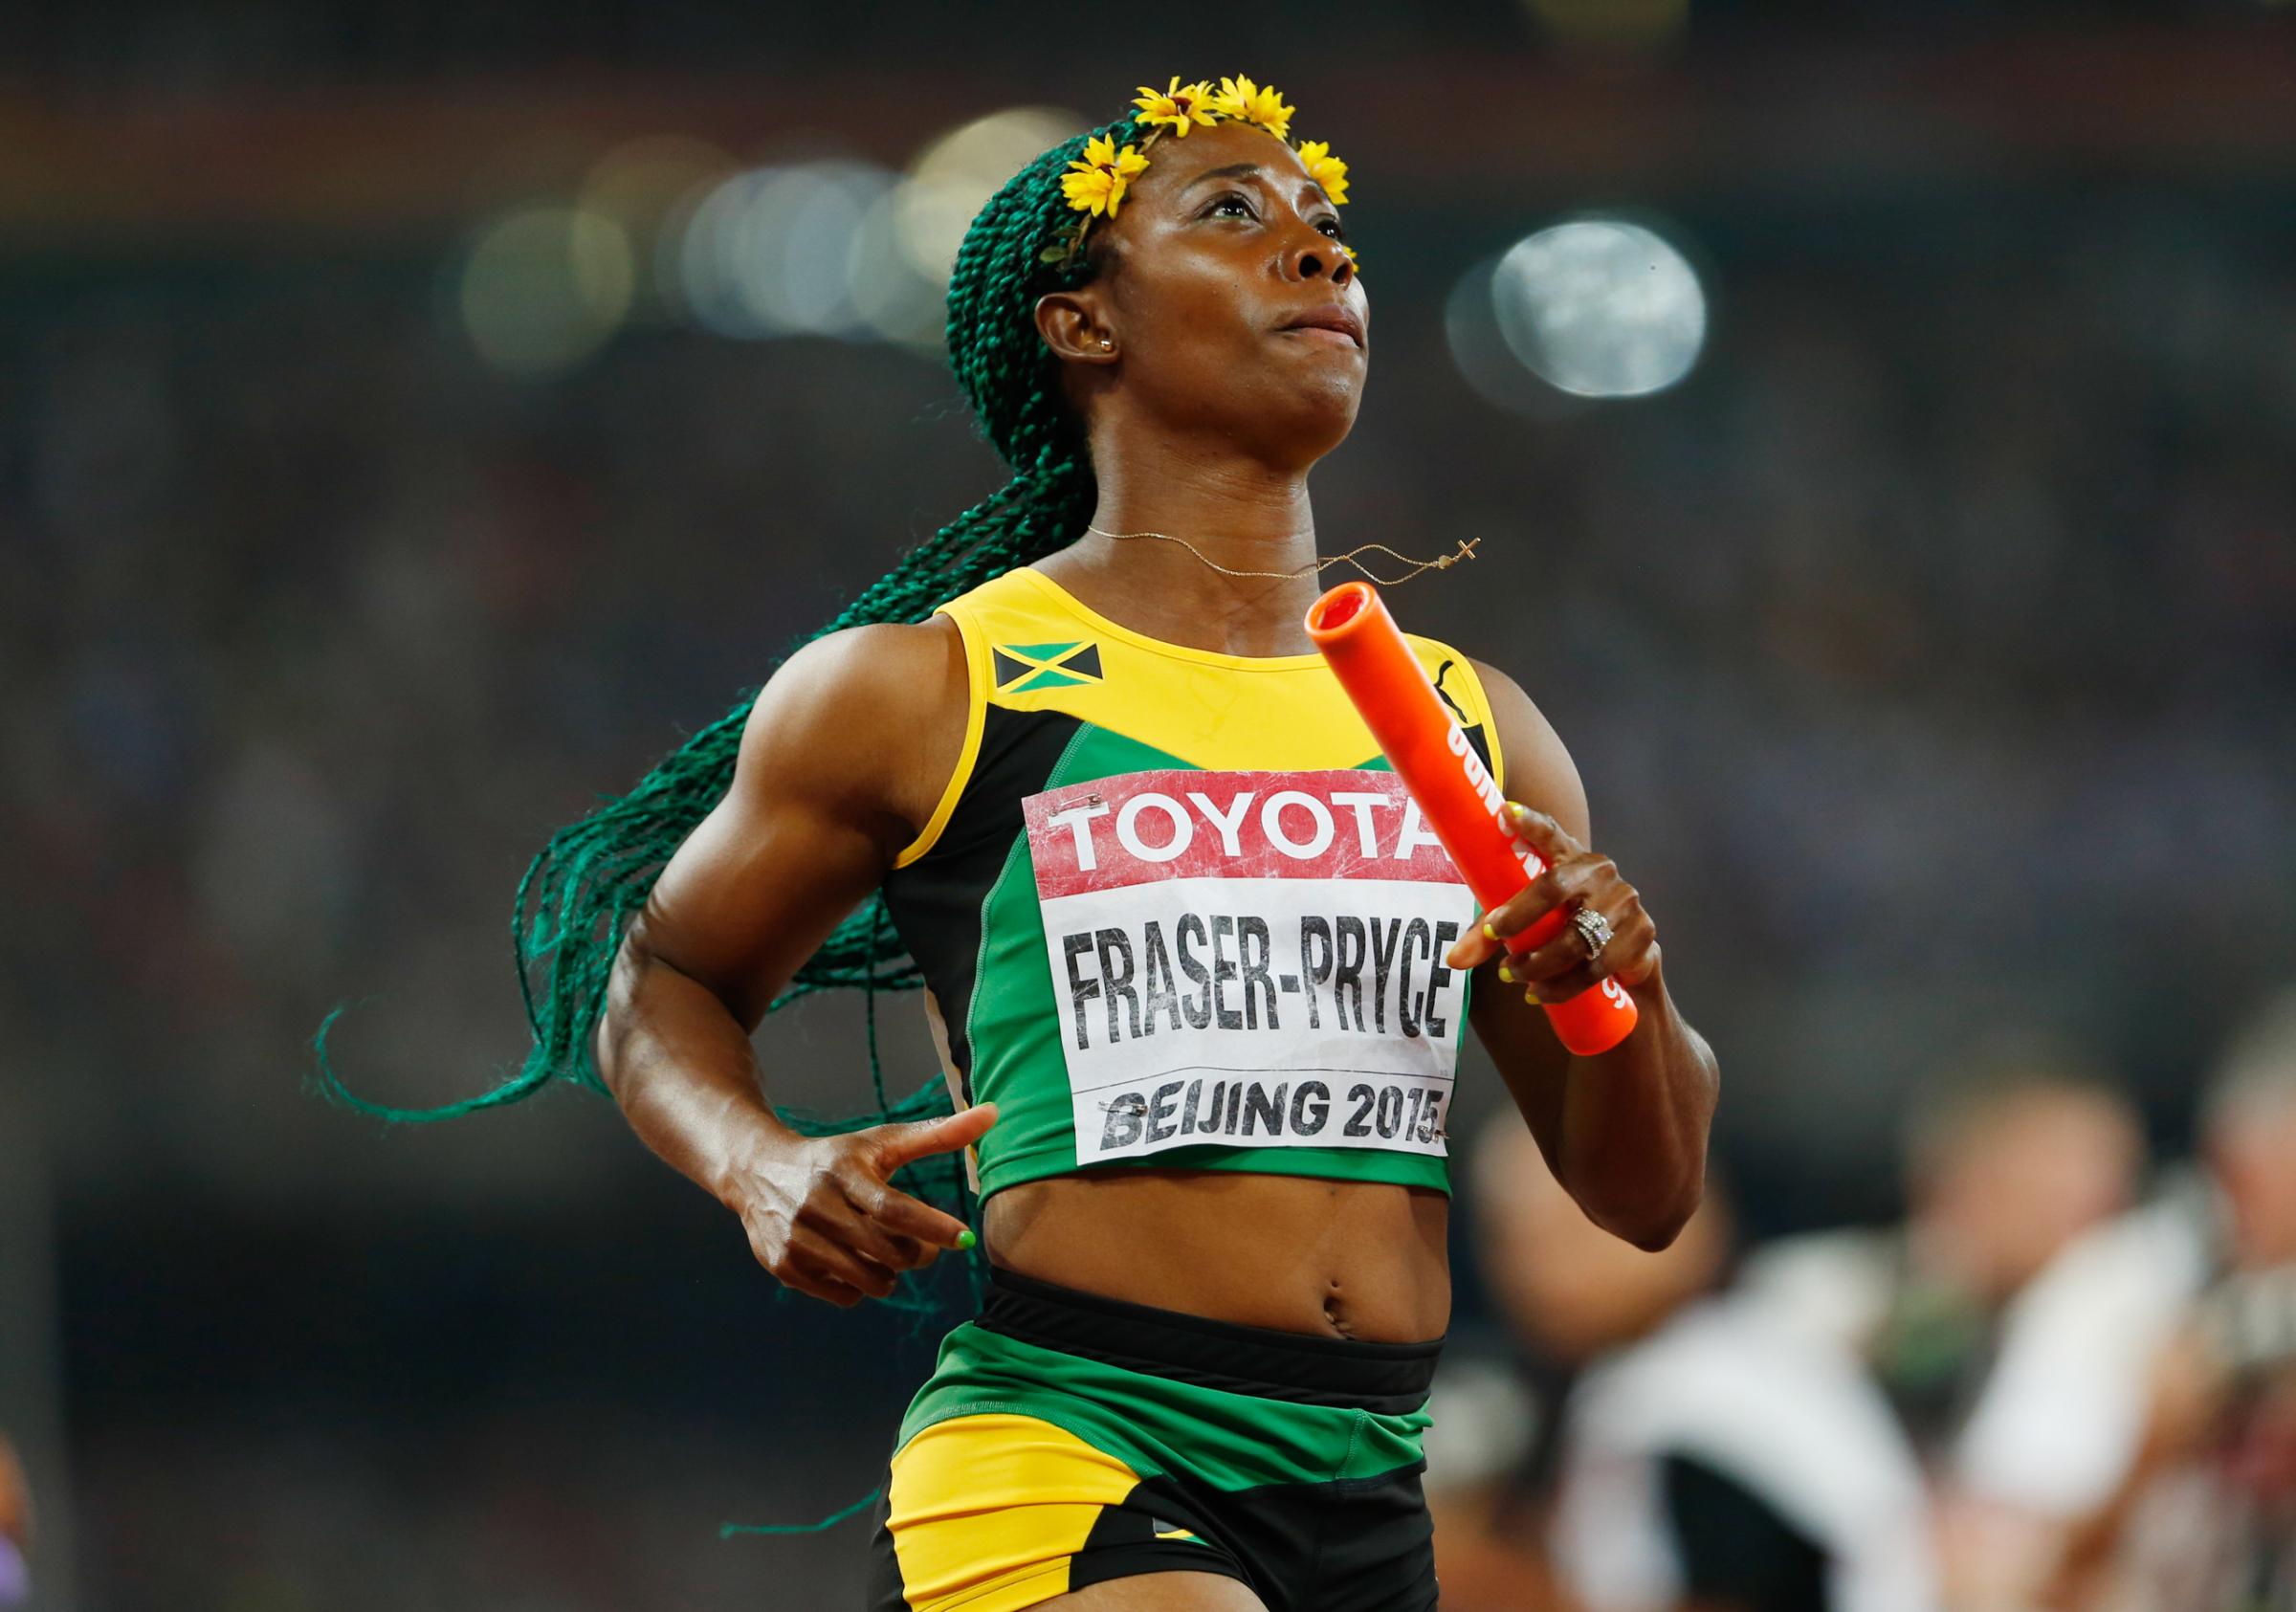 Shelly-Ann Fraser-Pryce—Usain Bolt may steal Jamaica’s sprinting spotlight, but Fraser-Pryce deserves her due: no woman has won three straight 100-m Olympic golds, a feat Fraser-Pryce can accomplish in Rio.